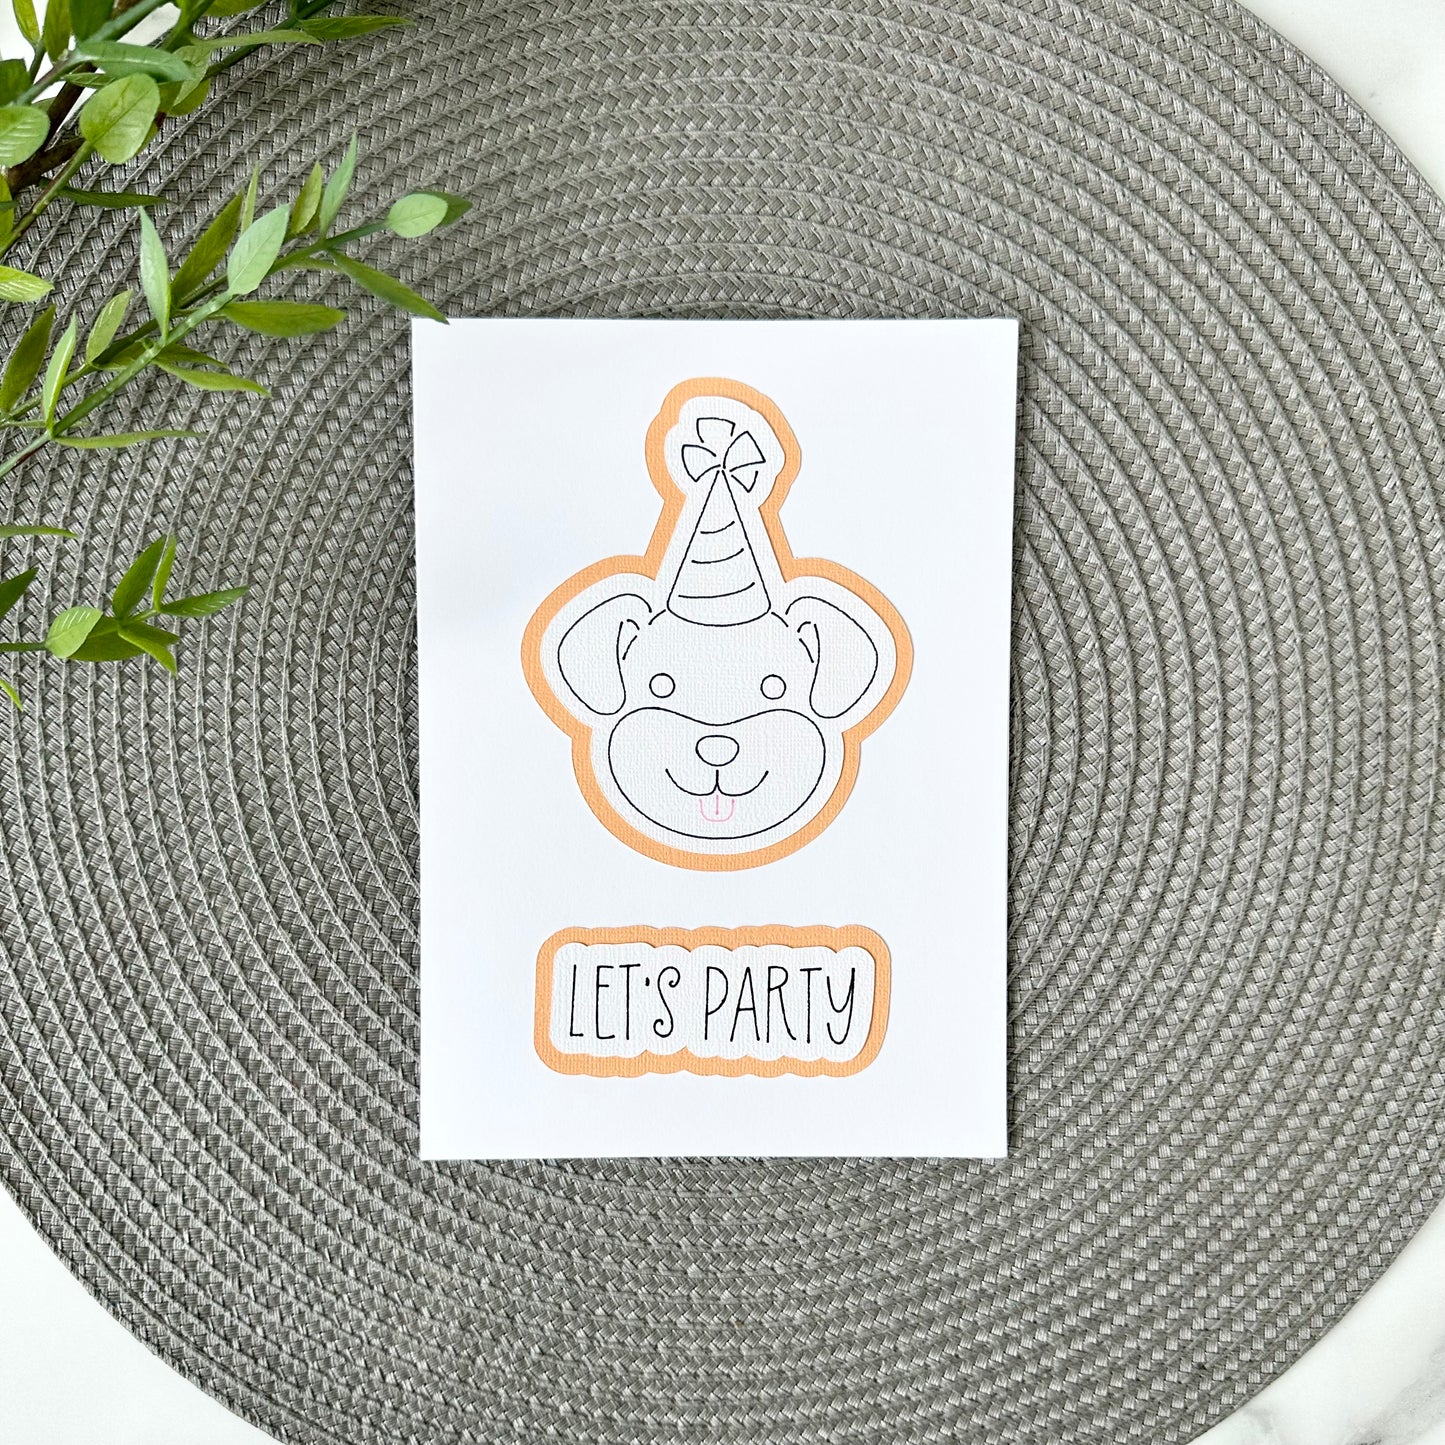 Let's Party Greeting Card - Dog